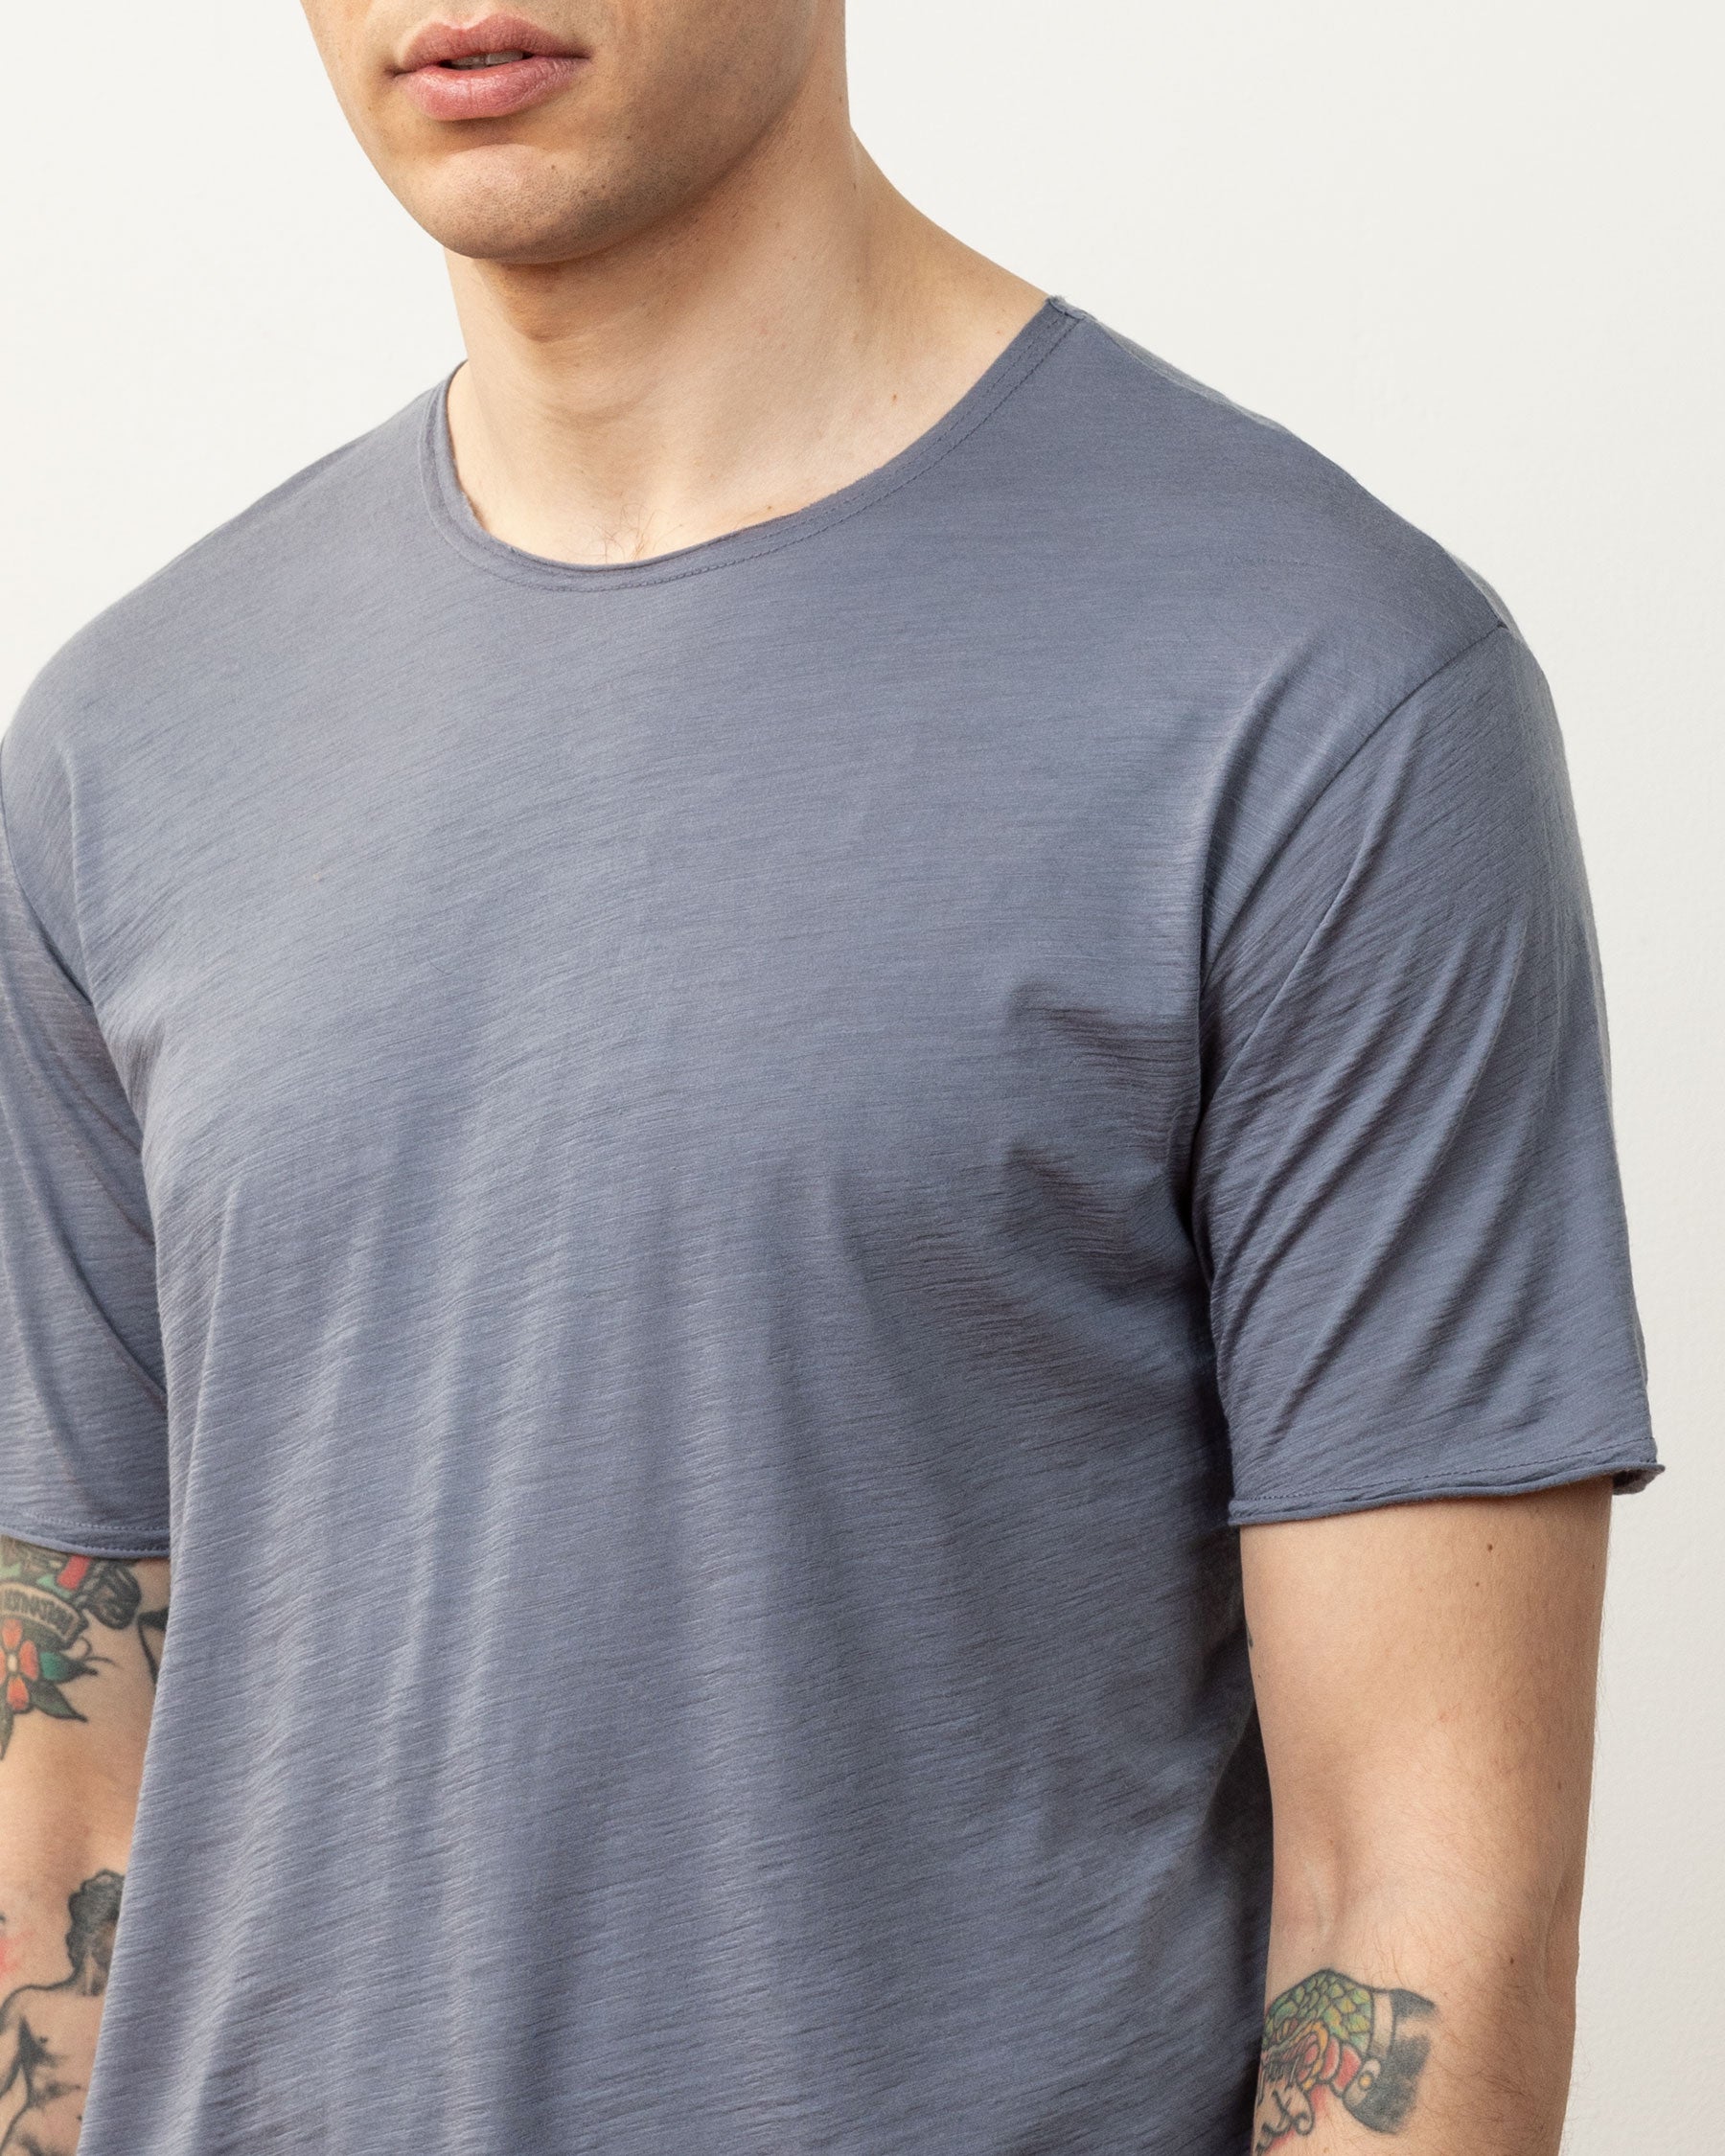 Cropped detail image of the Dreamweight Rawcut Shortsleeve collar